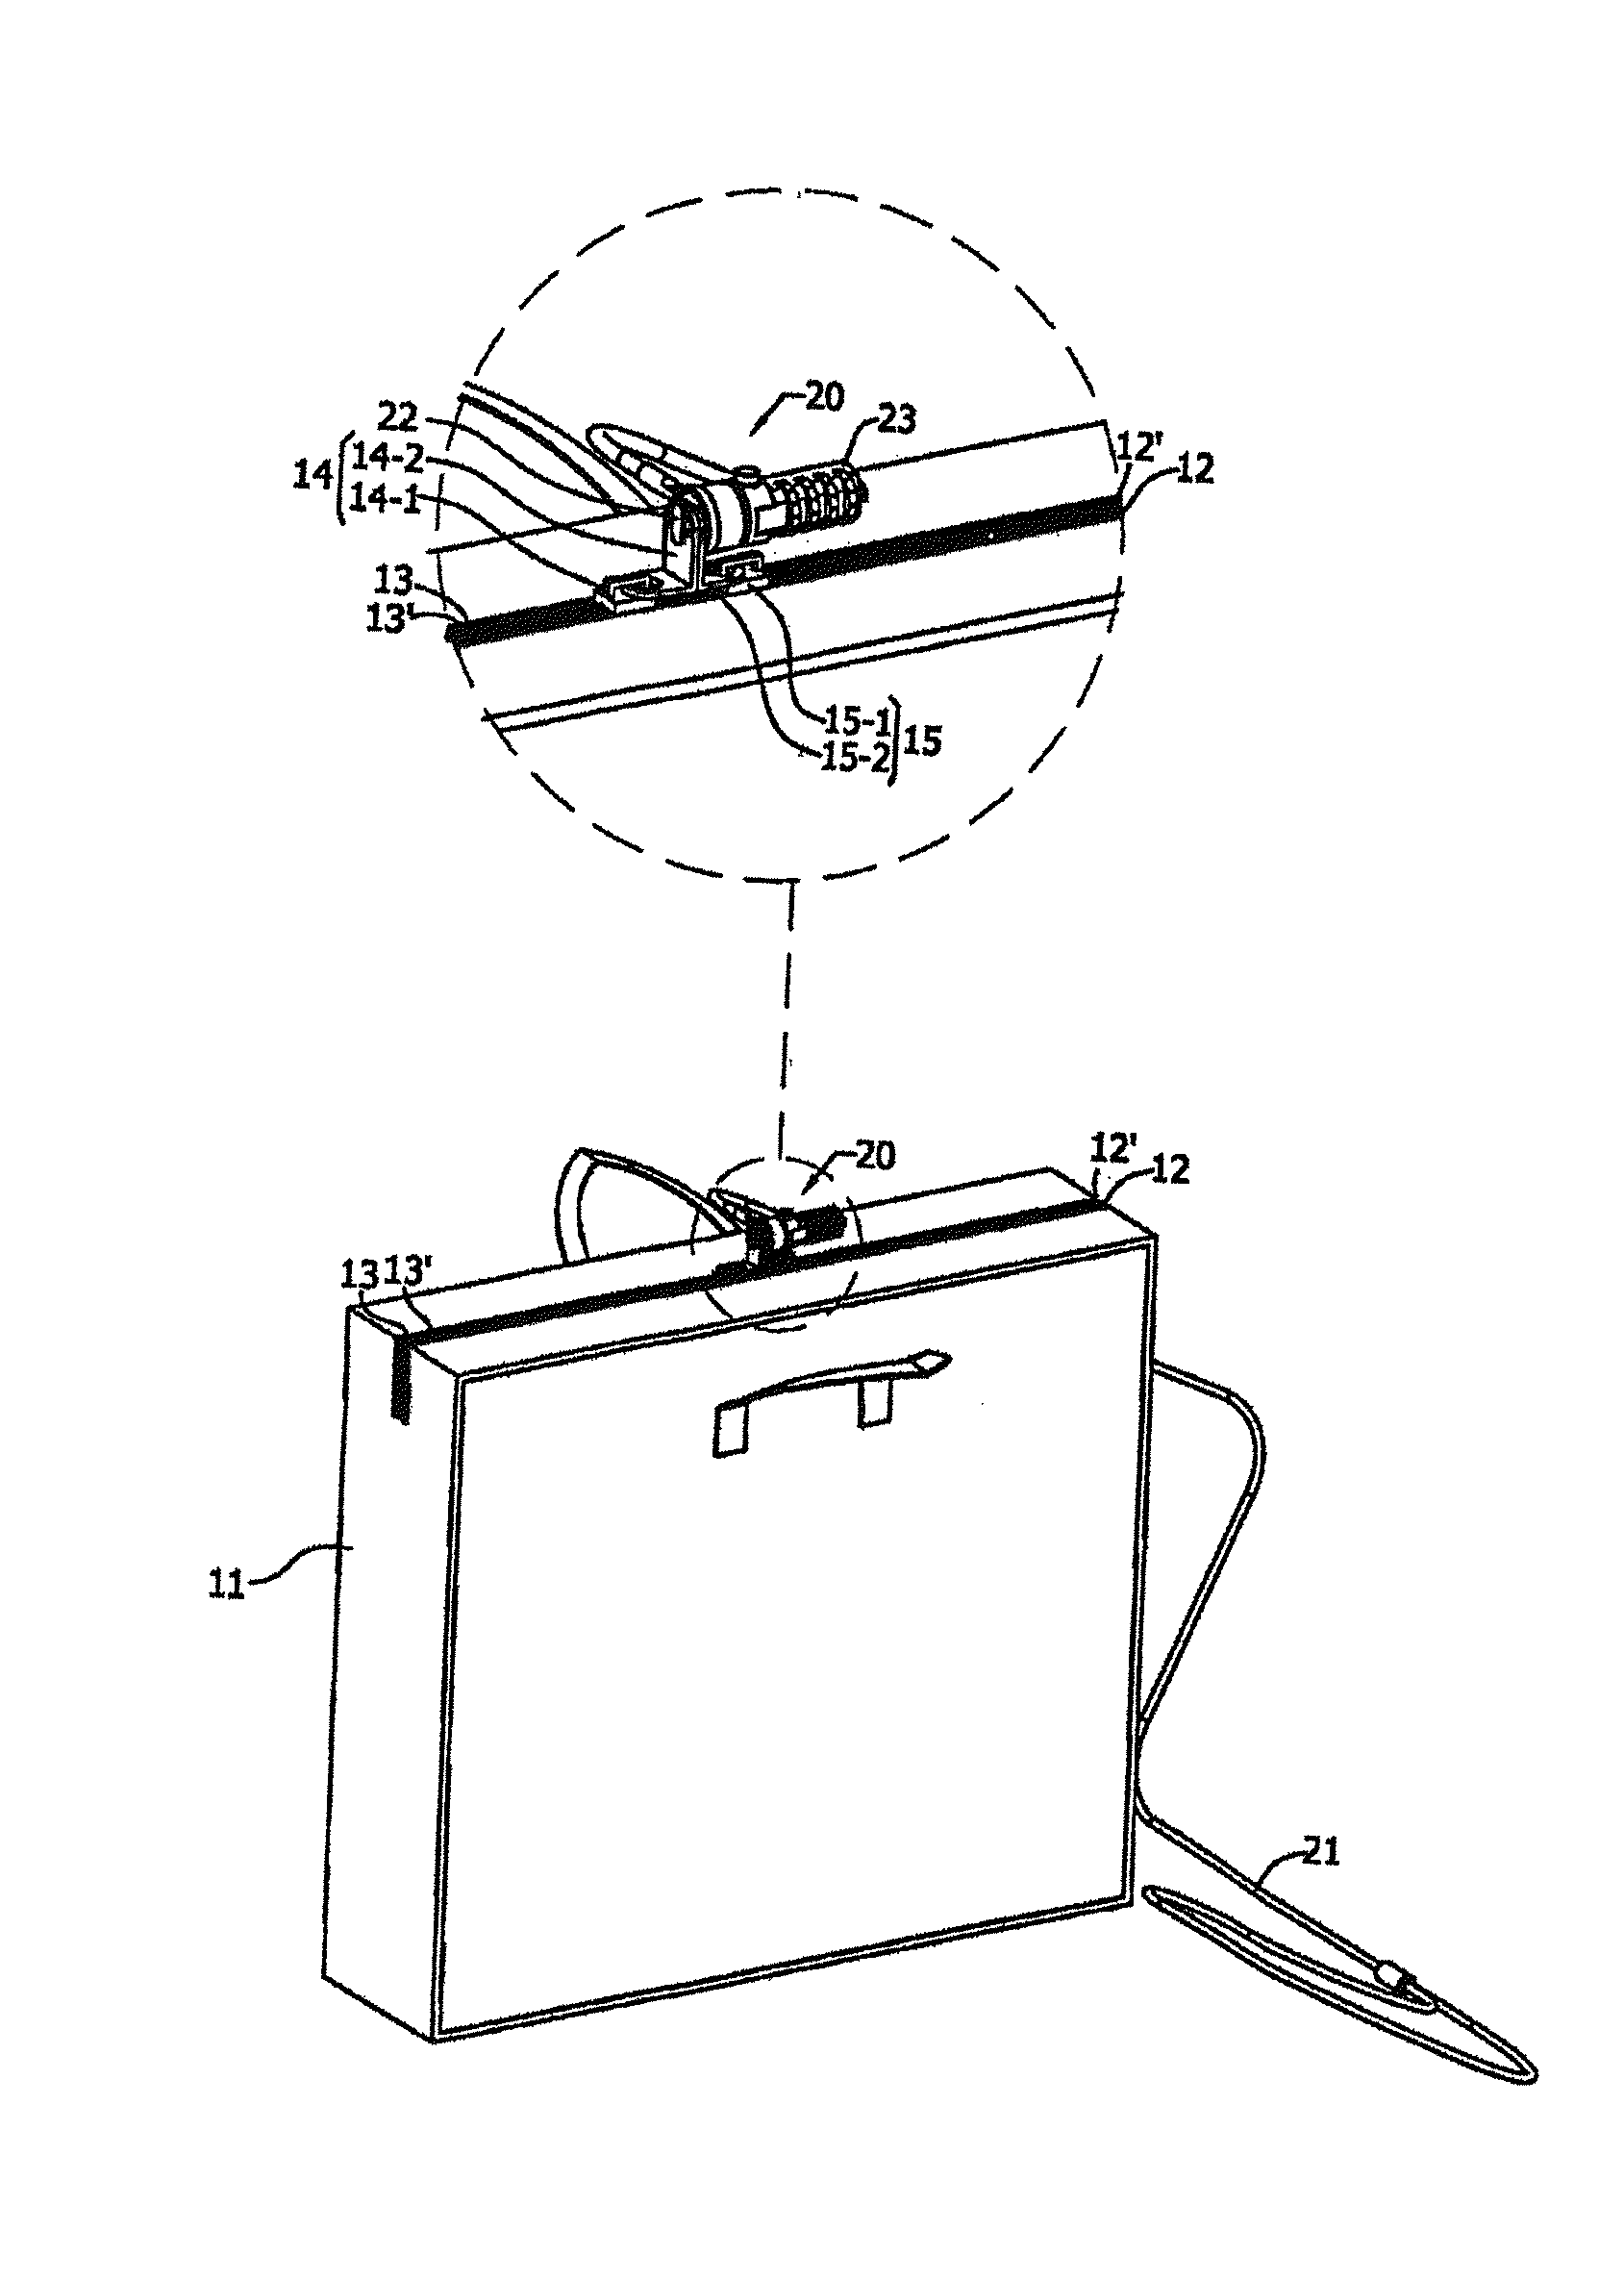 Bag with anti-theft function cross reference to related application